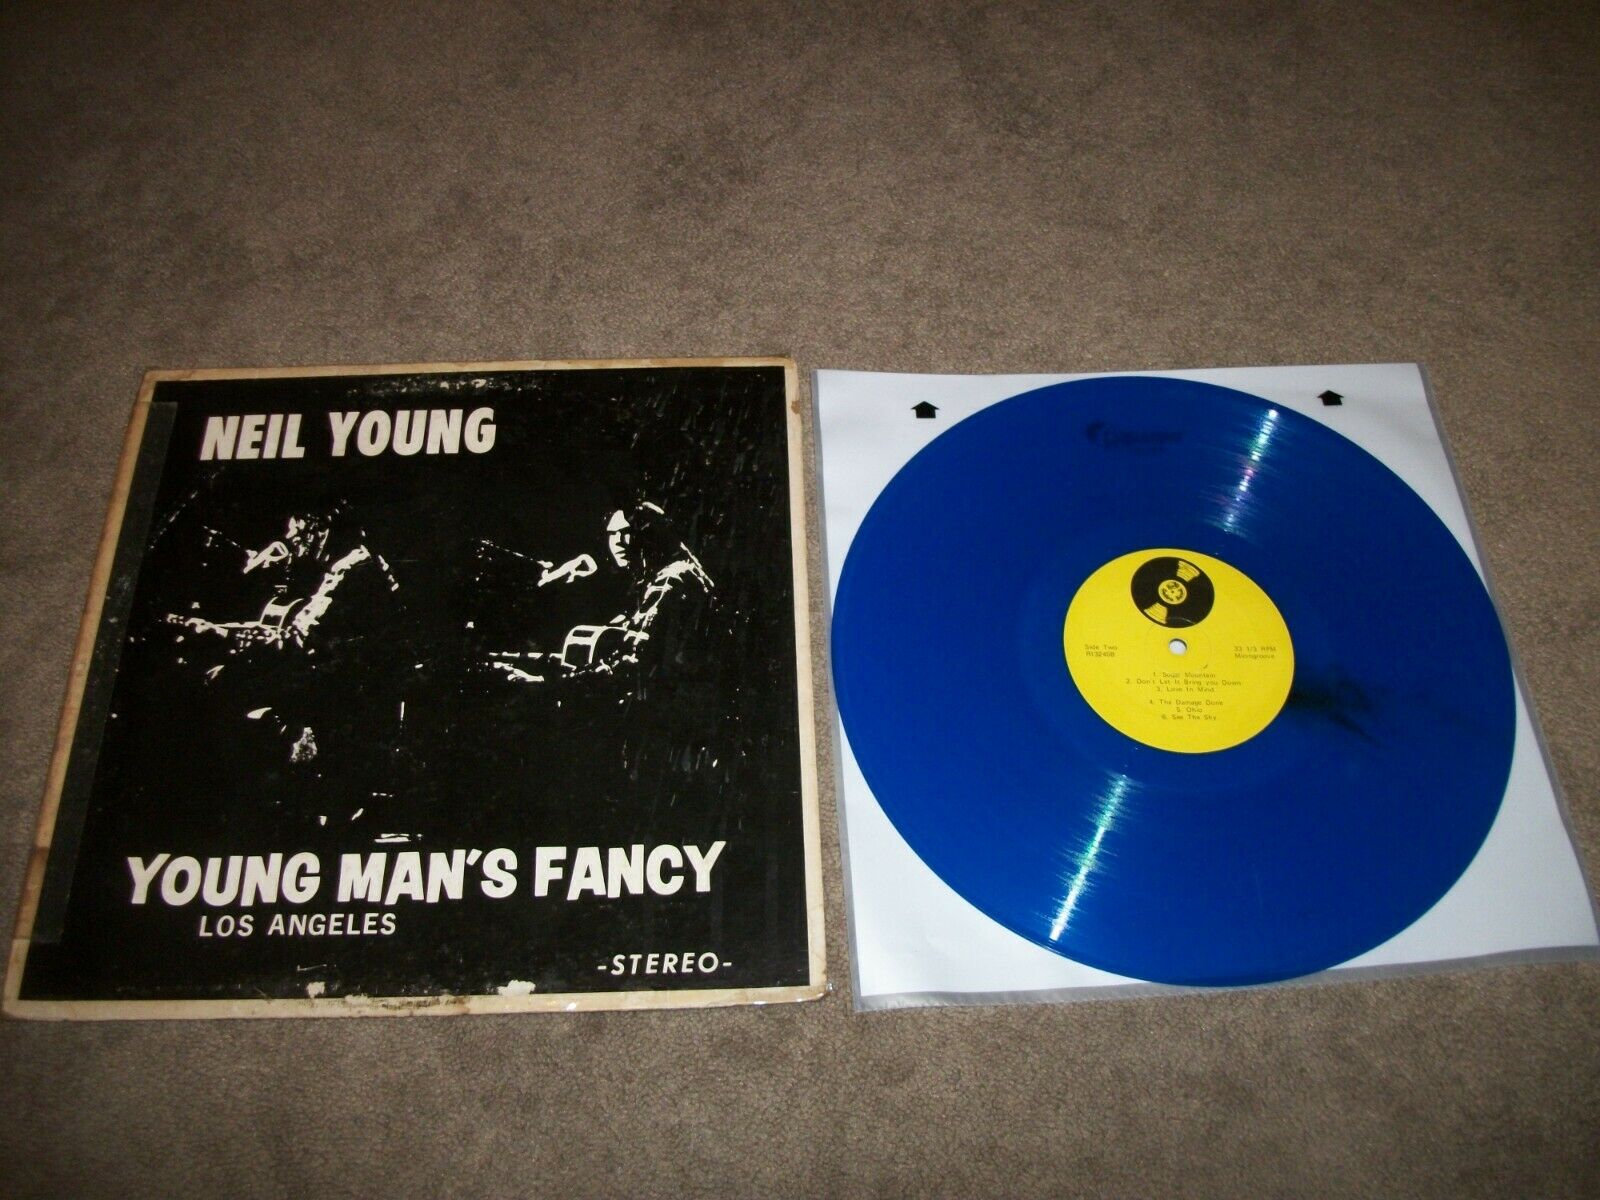 Pic 1 RARE BOOTLEG LP NEIL YOUNG - YOUNG MANS FANCY LIVE IN LOS ANGELES - BLUE VINYL